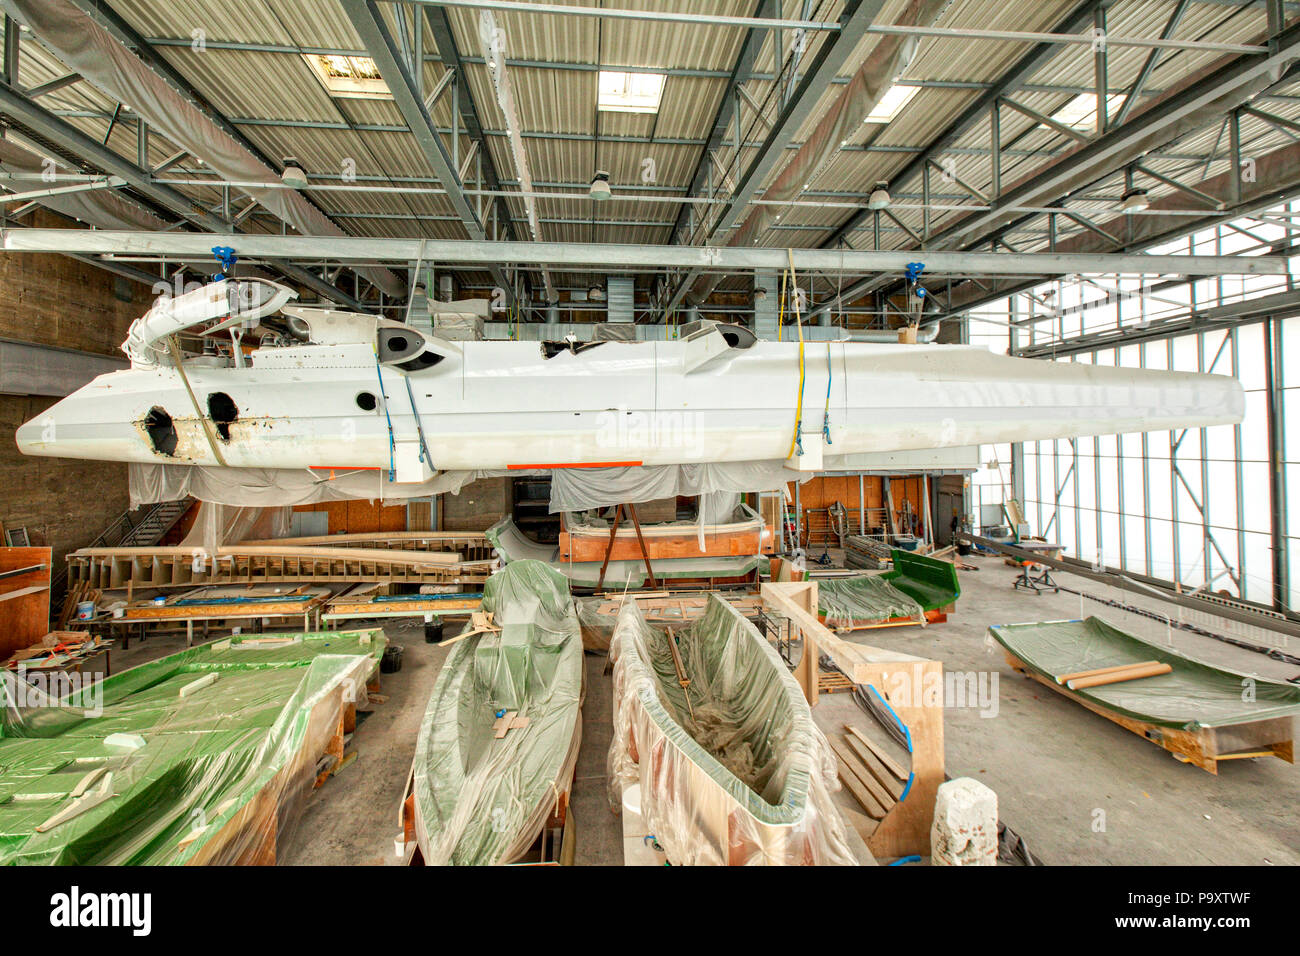 Trimaran racing yacht suspended from roof of a boat shed, Keroman, Submarine Base, Lorient, Morbihan, Brittany, France. Stock Photo